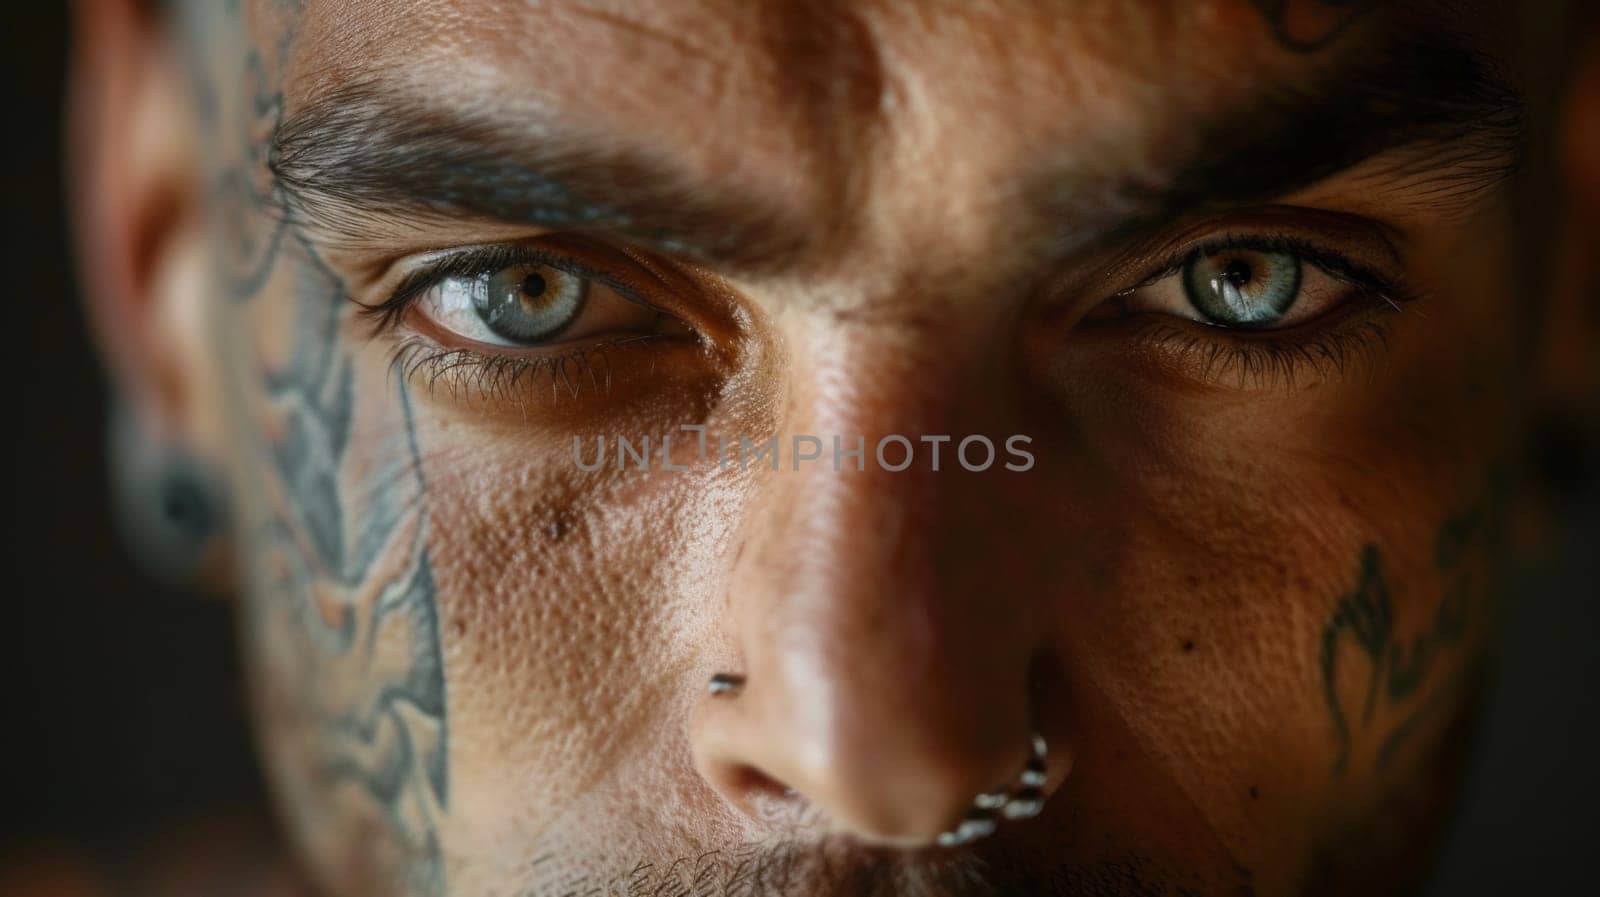 A close up of a man with piercings and tattoos on his face